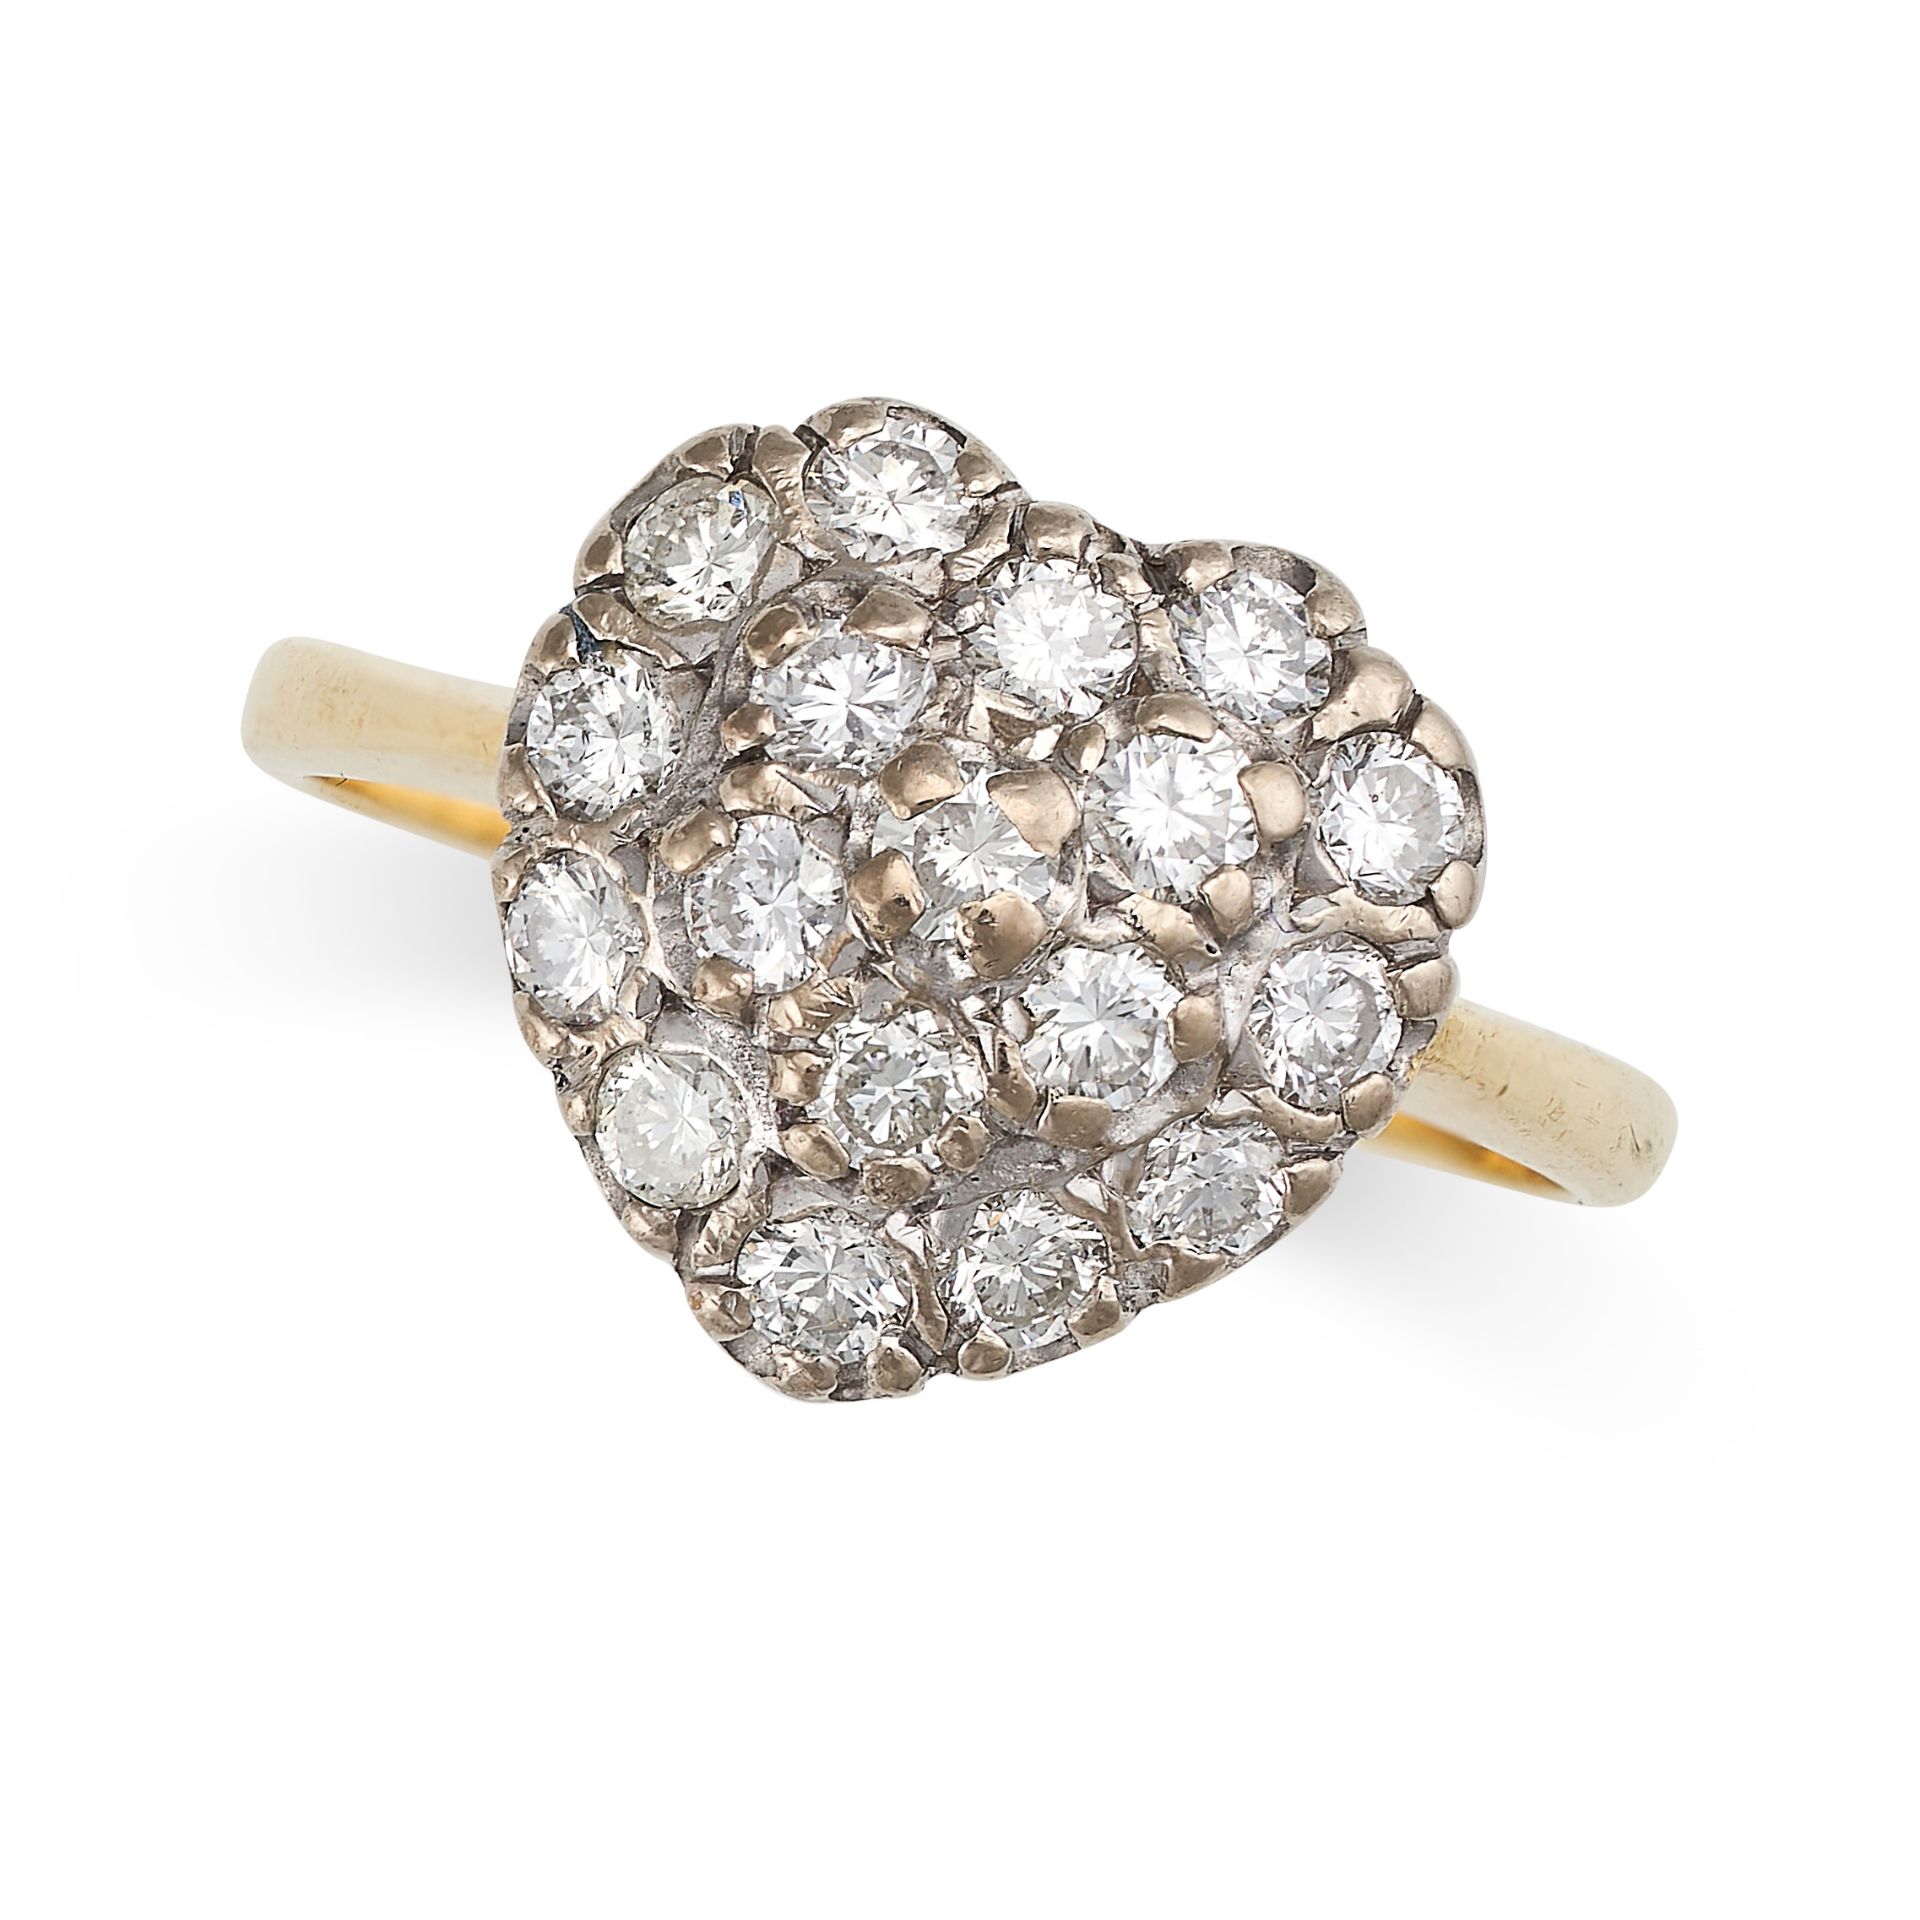 A DIAMOND CLUSTER HEART RING in 18ct yellow gold, the heart shaped face set with round cut diamonds,